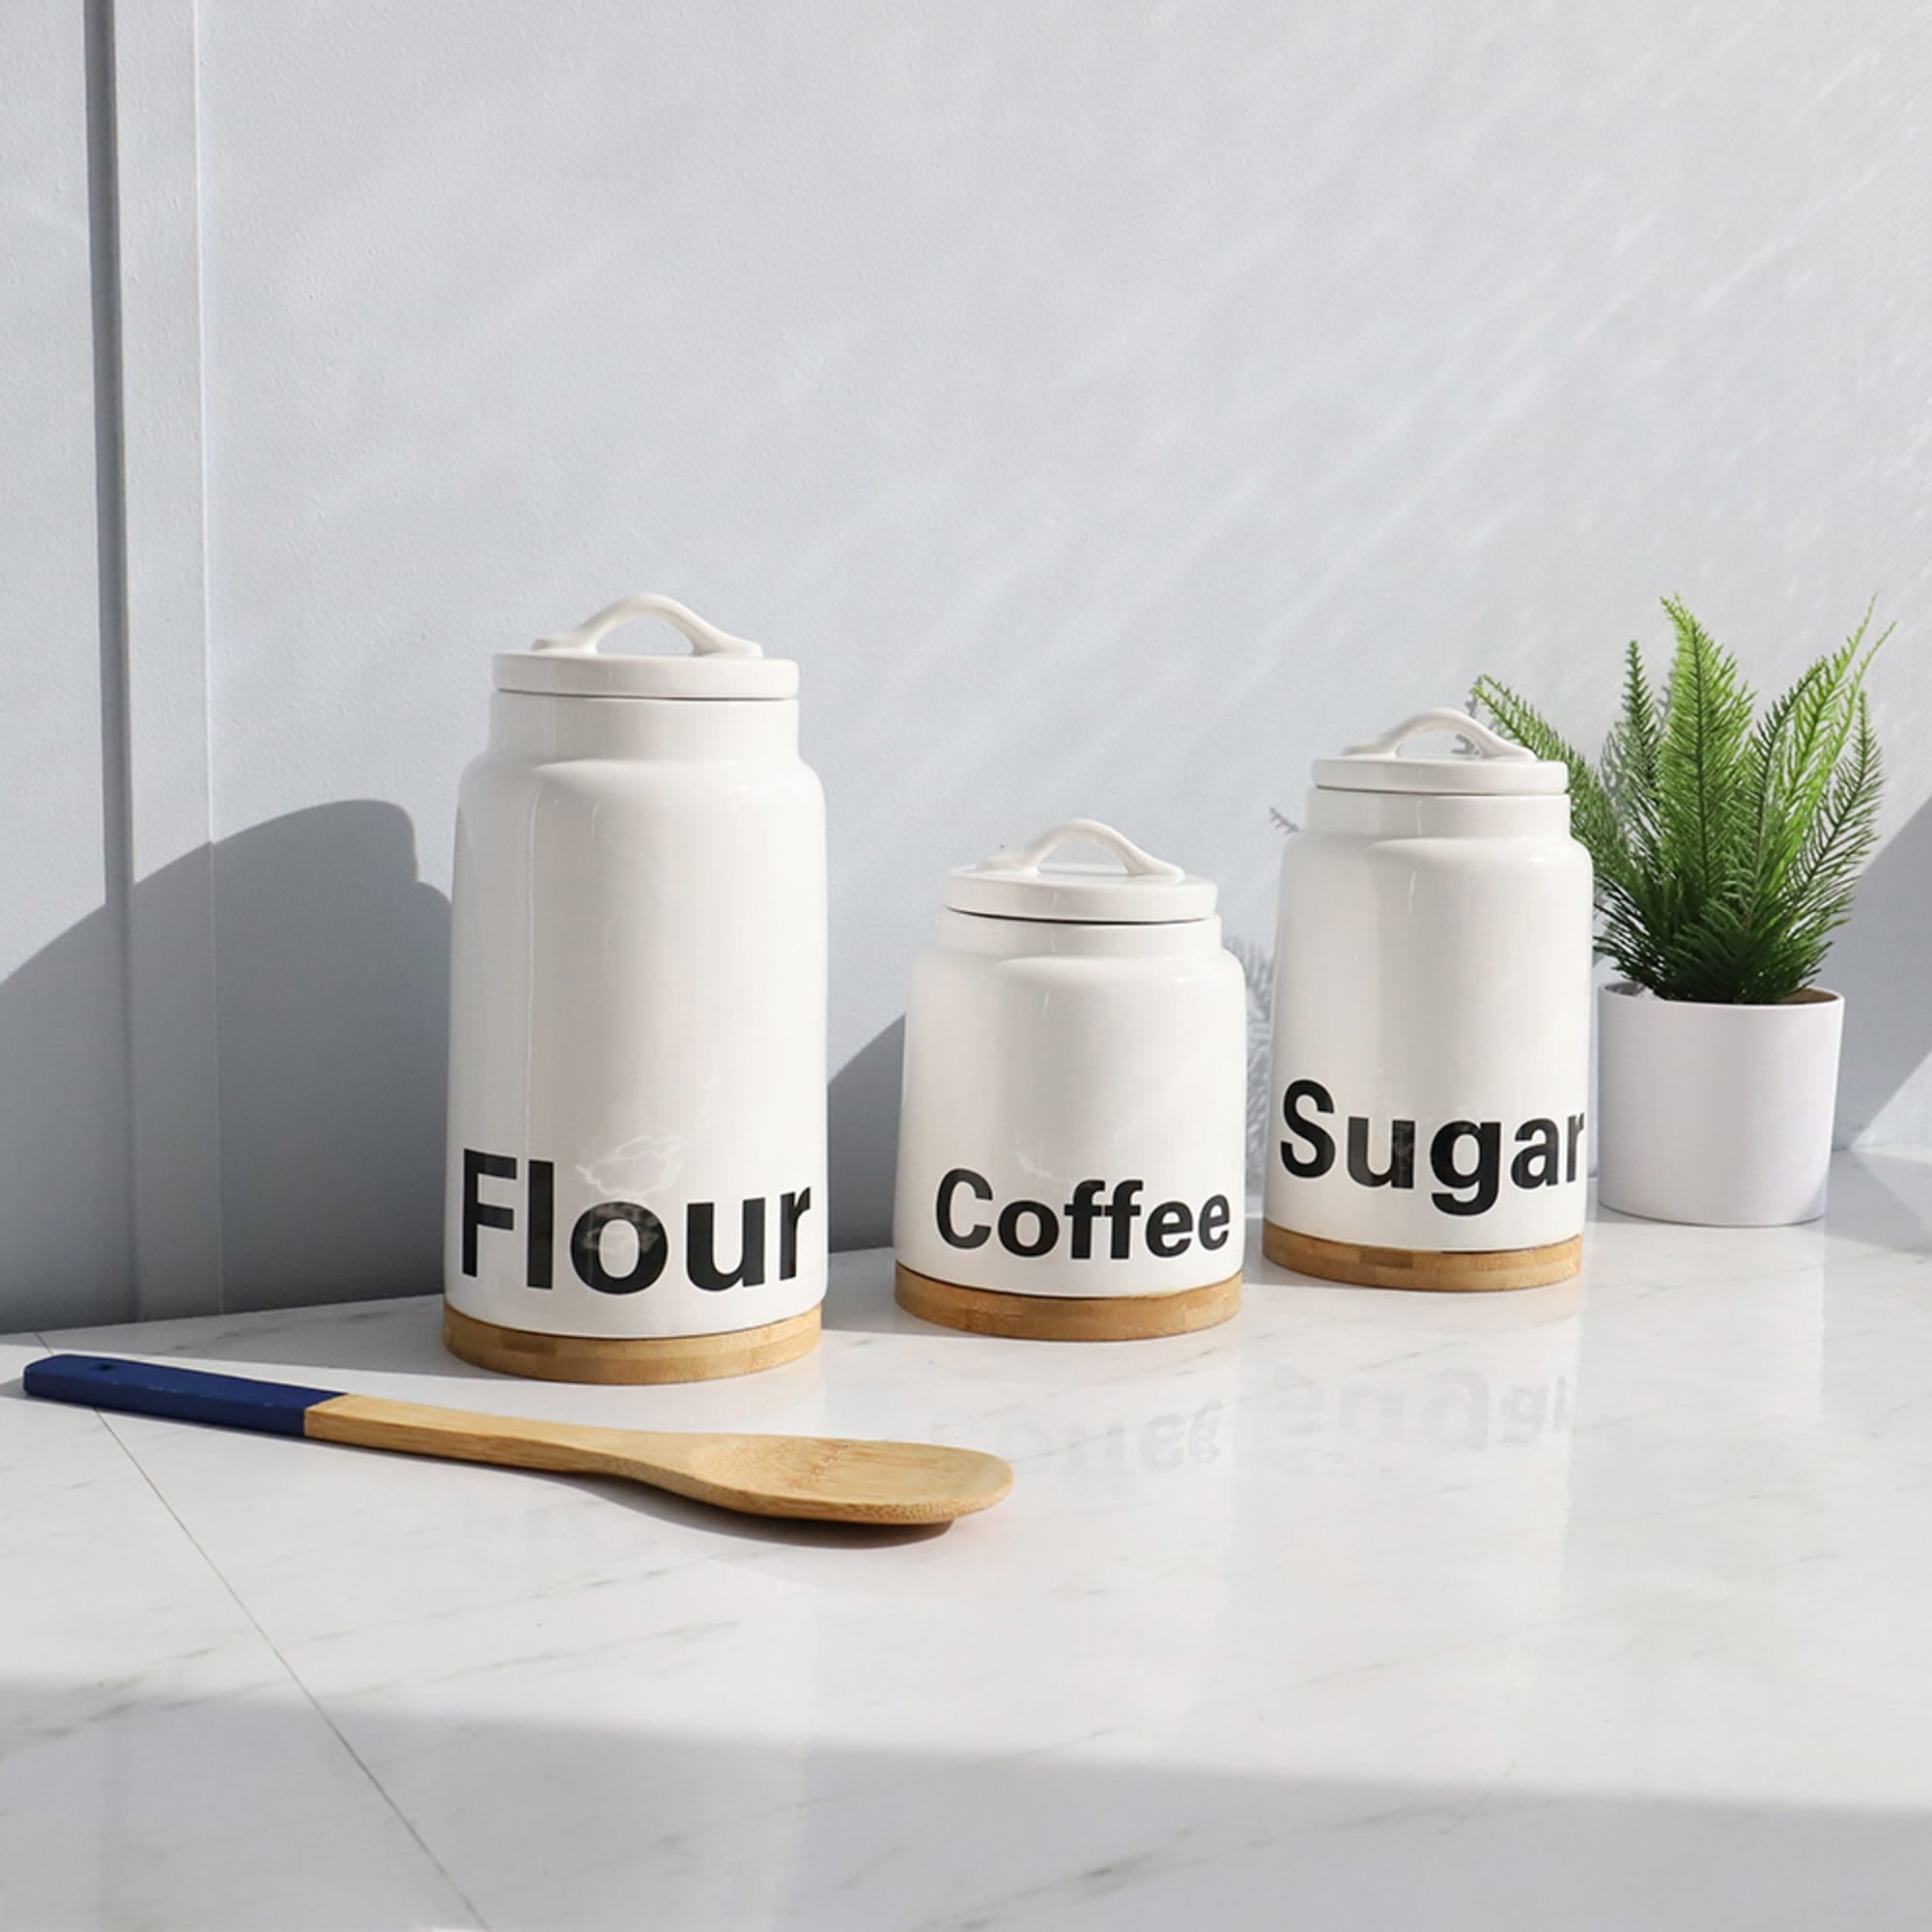 Home Basics 3-Piece Printed Ceramic Canister Set with Bamboo Accents, White $20.00 EACH, CASE PACK OF 2